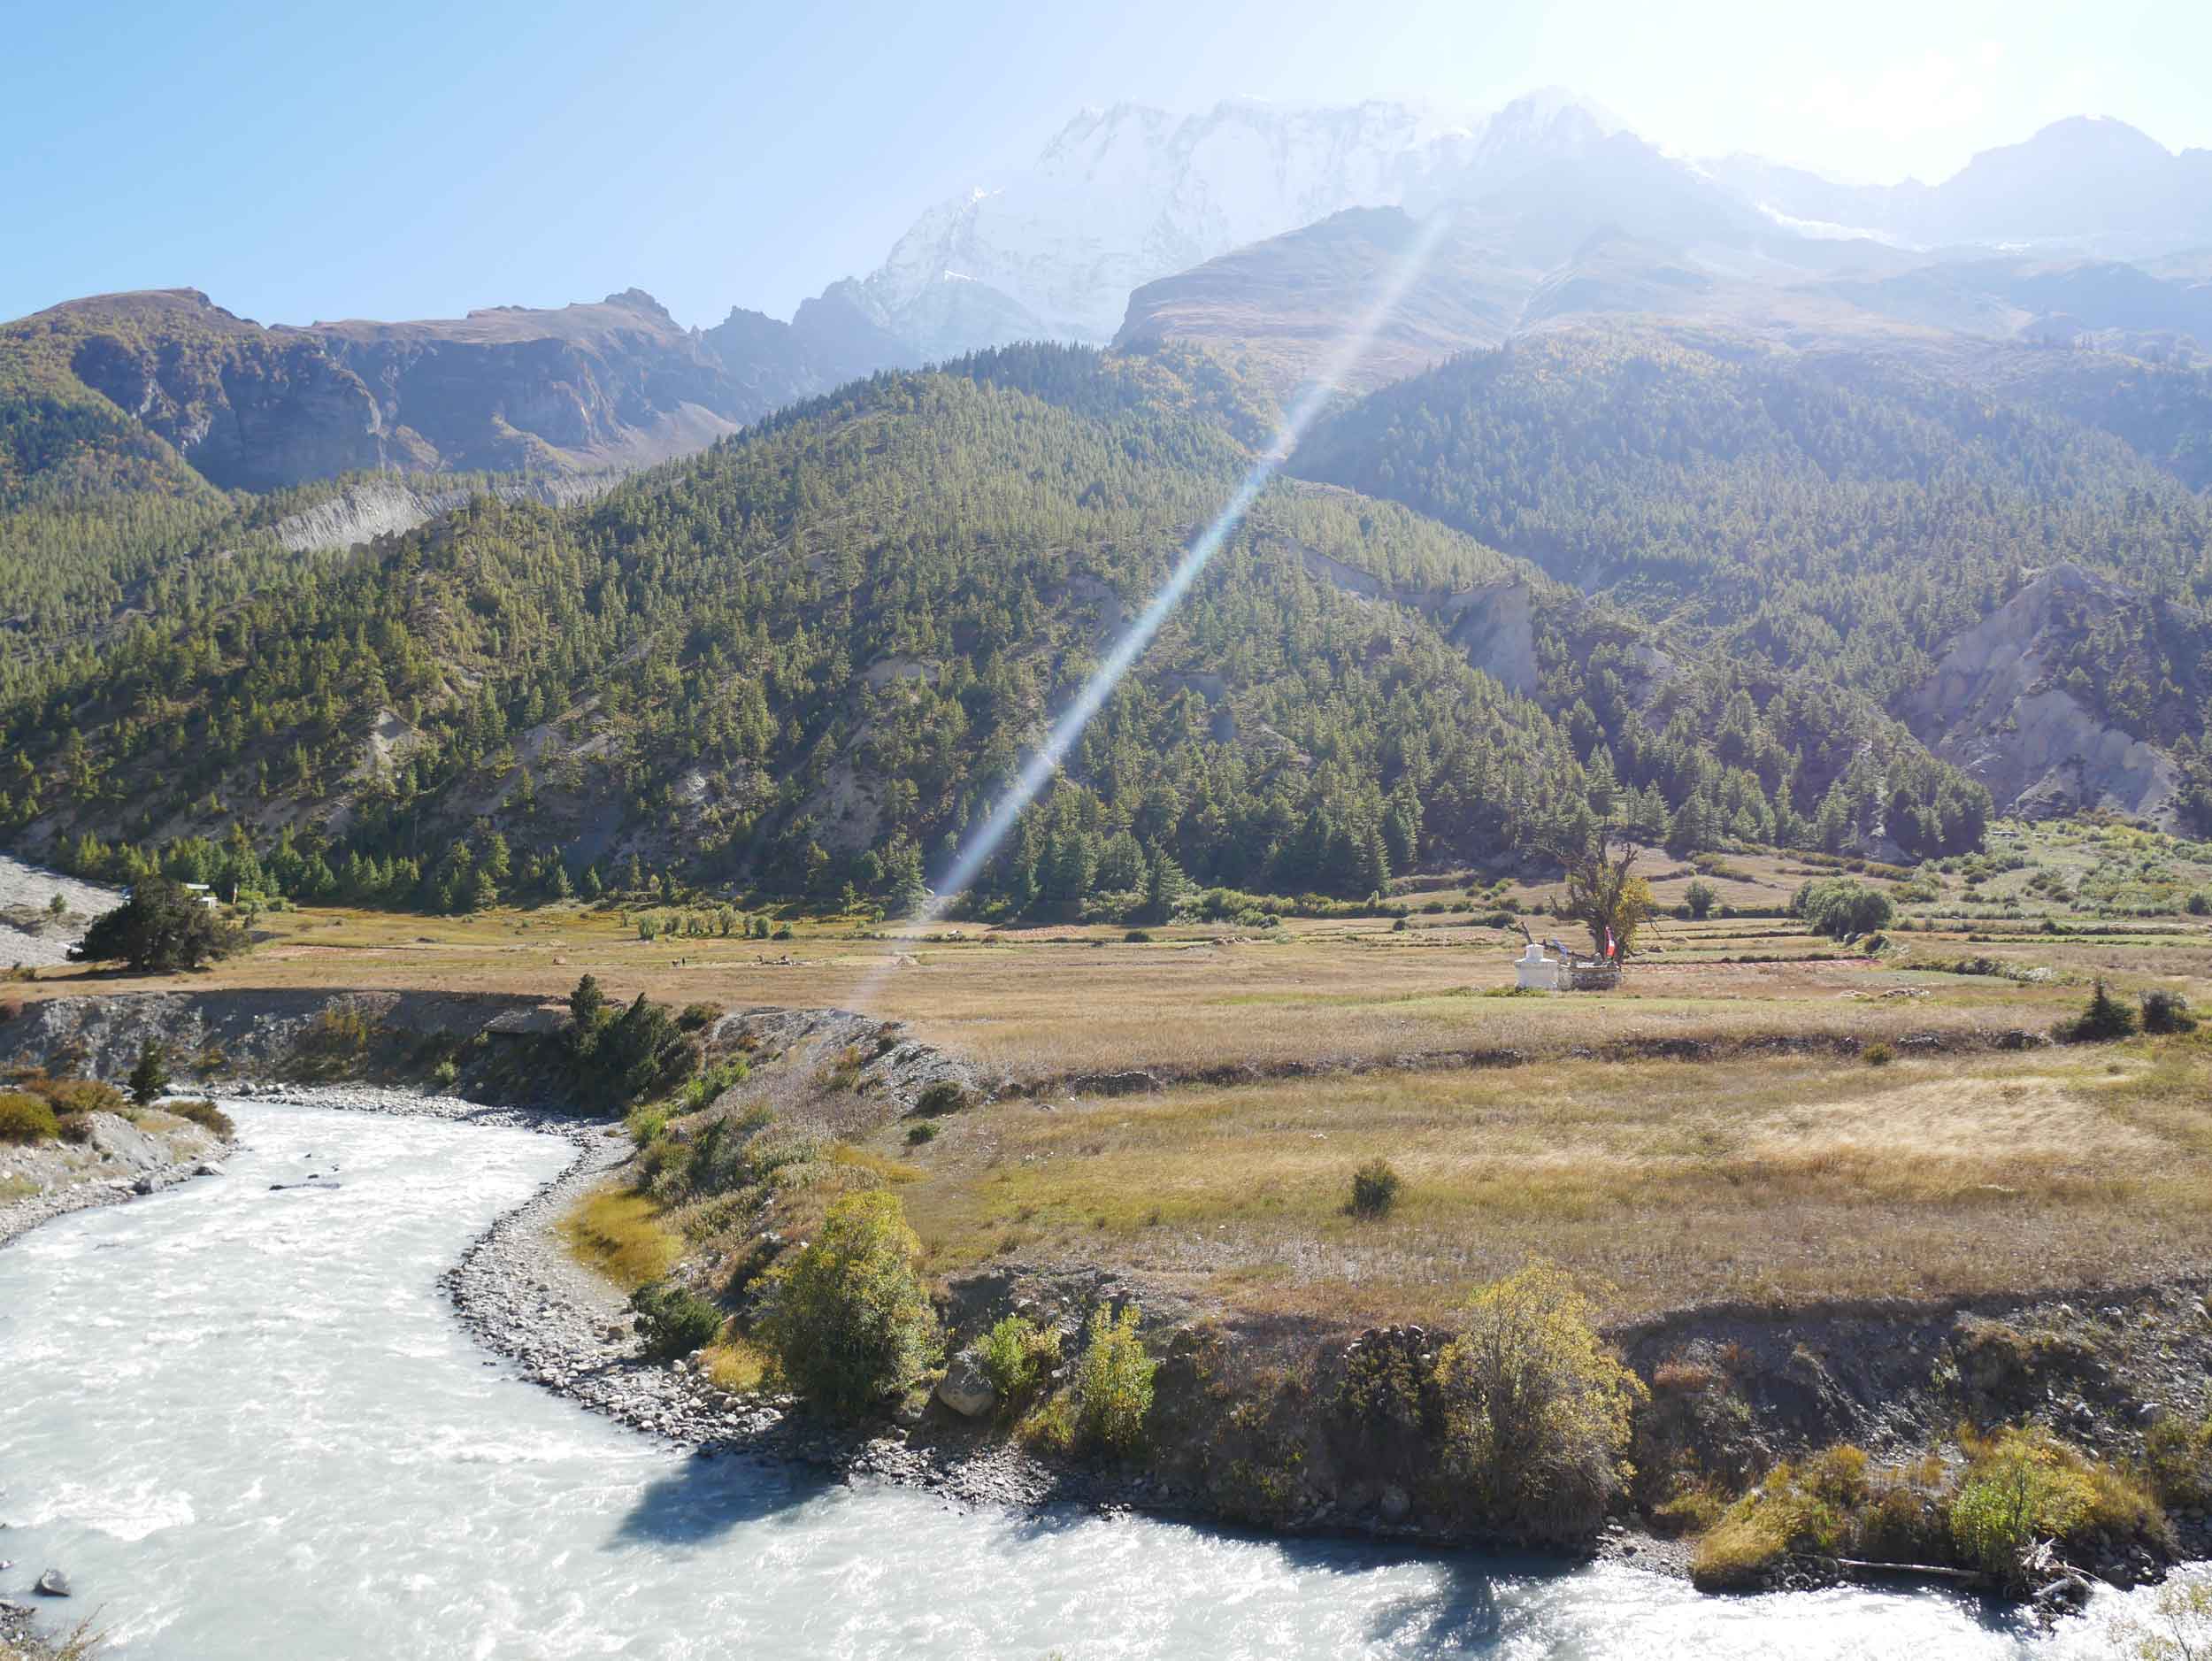  Our hike into the regional capital of Manang during ‘golden hour’ brought us spectacular views of the valley. 